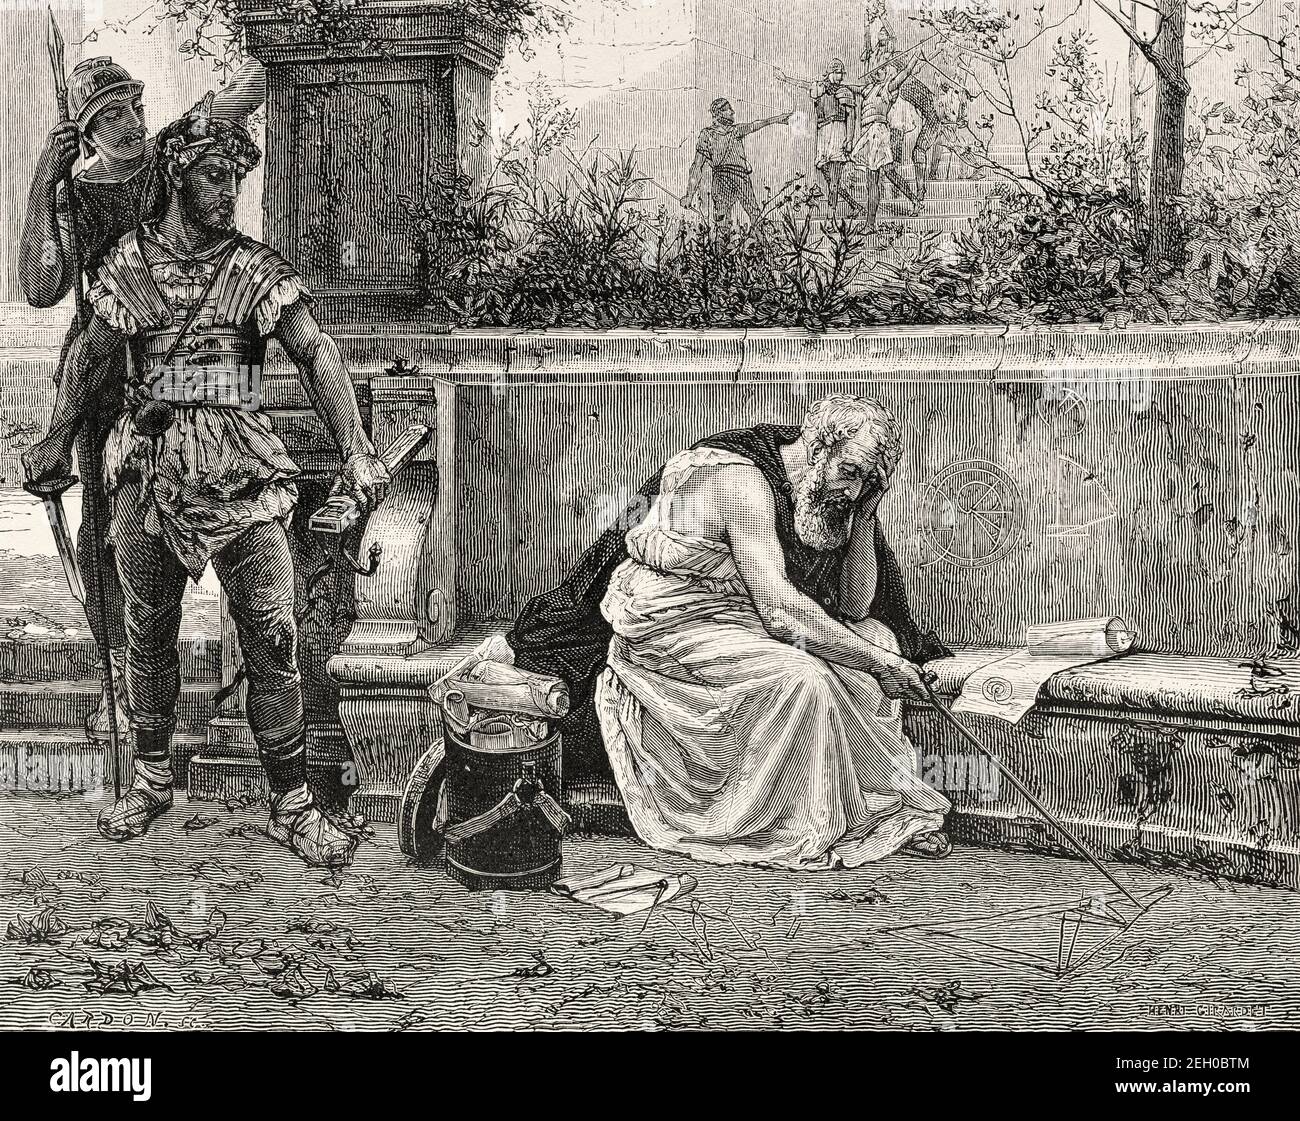 The Death of Archimedes, killed by a Roman soldier during the assault on Syracuse, Ancient greek history. Old 19th century engraved illustration from El Mundo Ilustrado 1879 Stock Photo